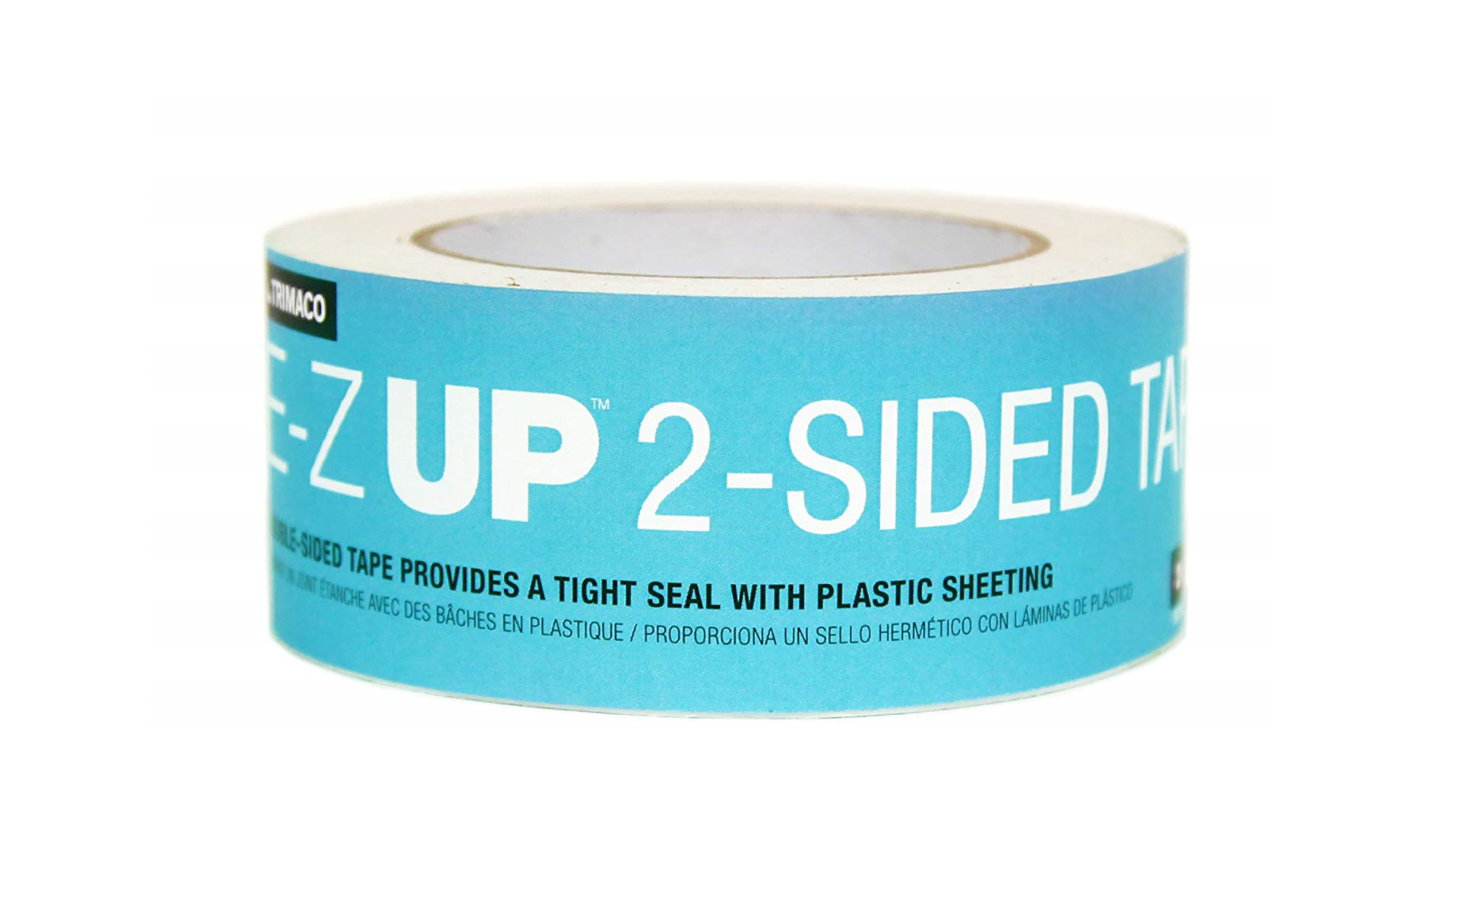 Trimaco 54744 Door E-Z Up Double Sided Tape, White - Buy